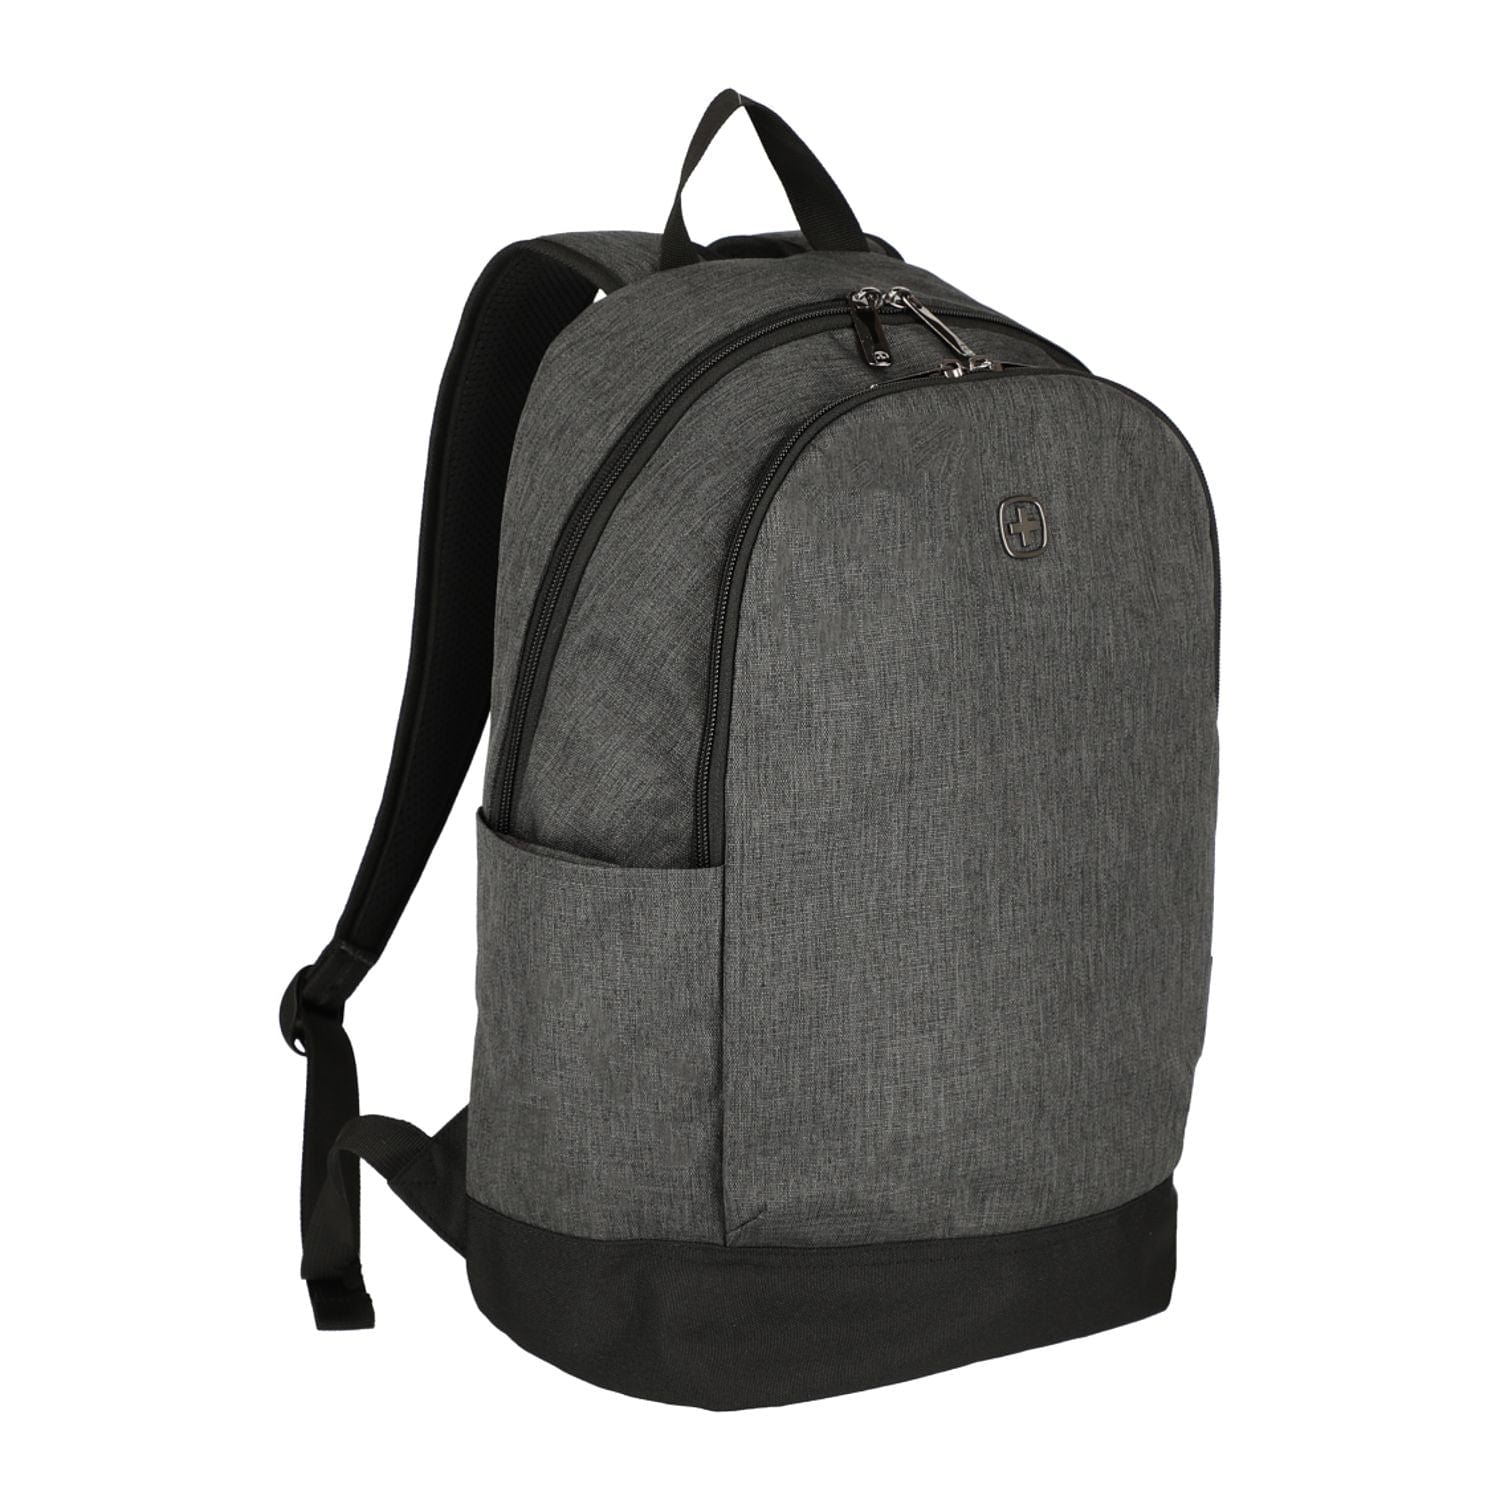 Wenger Bags One Size / Black Wenger - Recycled Storm 15" Laptop Backpack